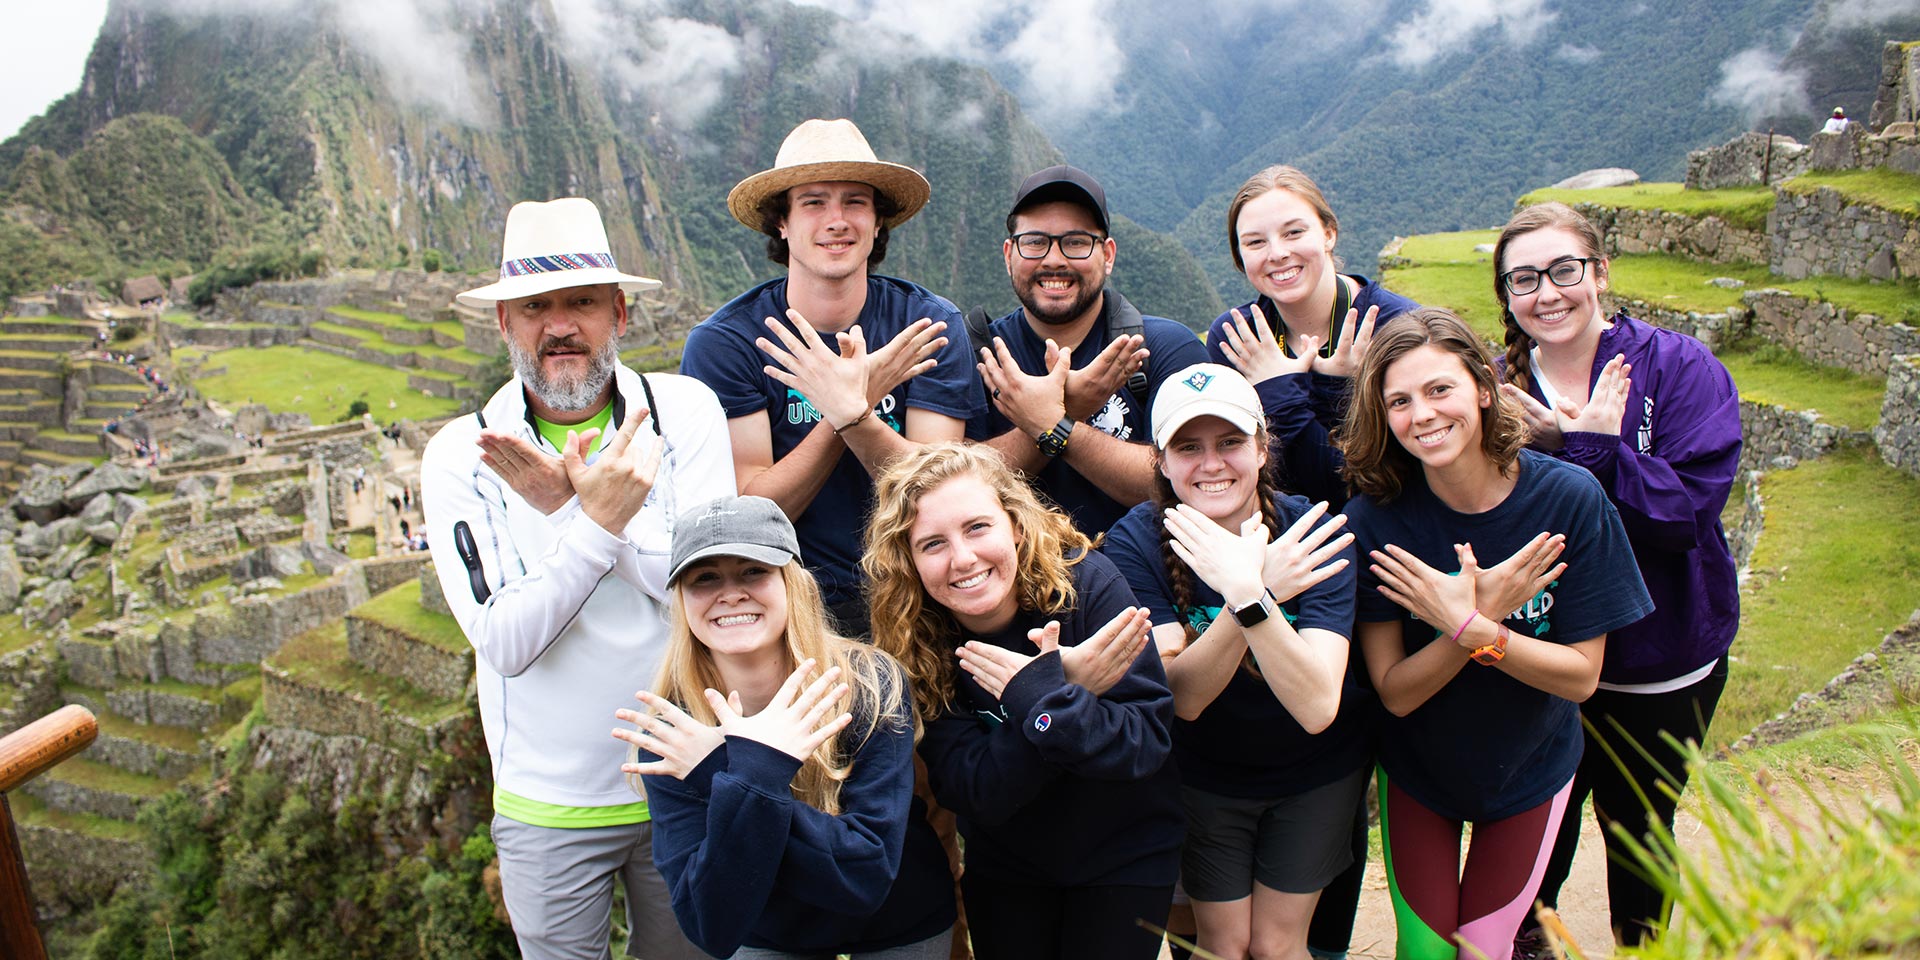 Students do the Wings Up hands in front of the Machu Picchu ruins